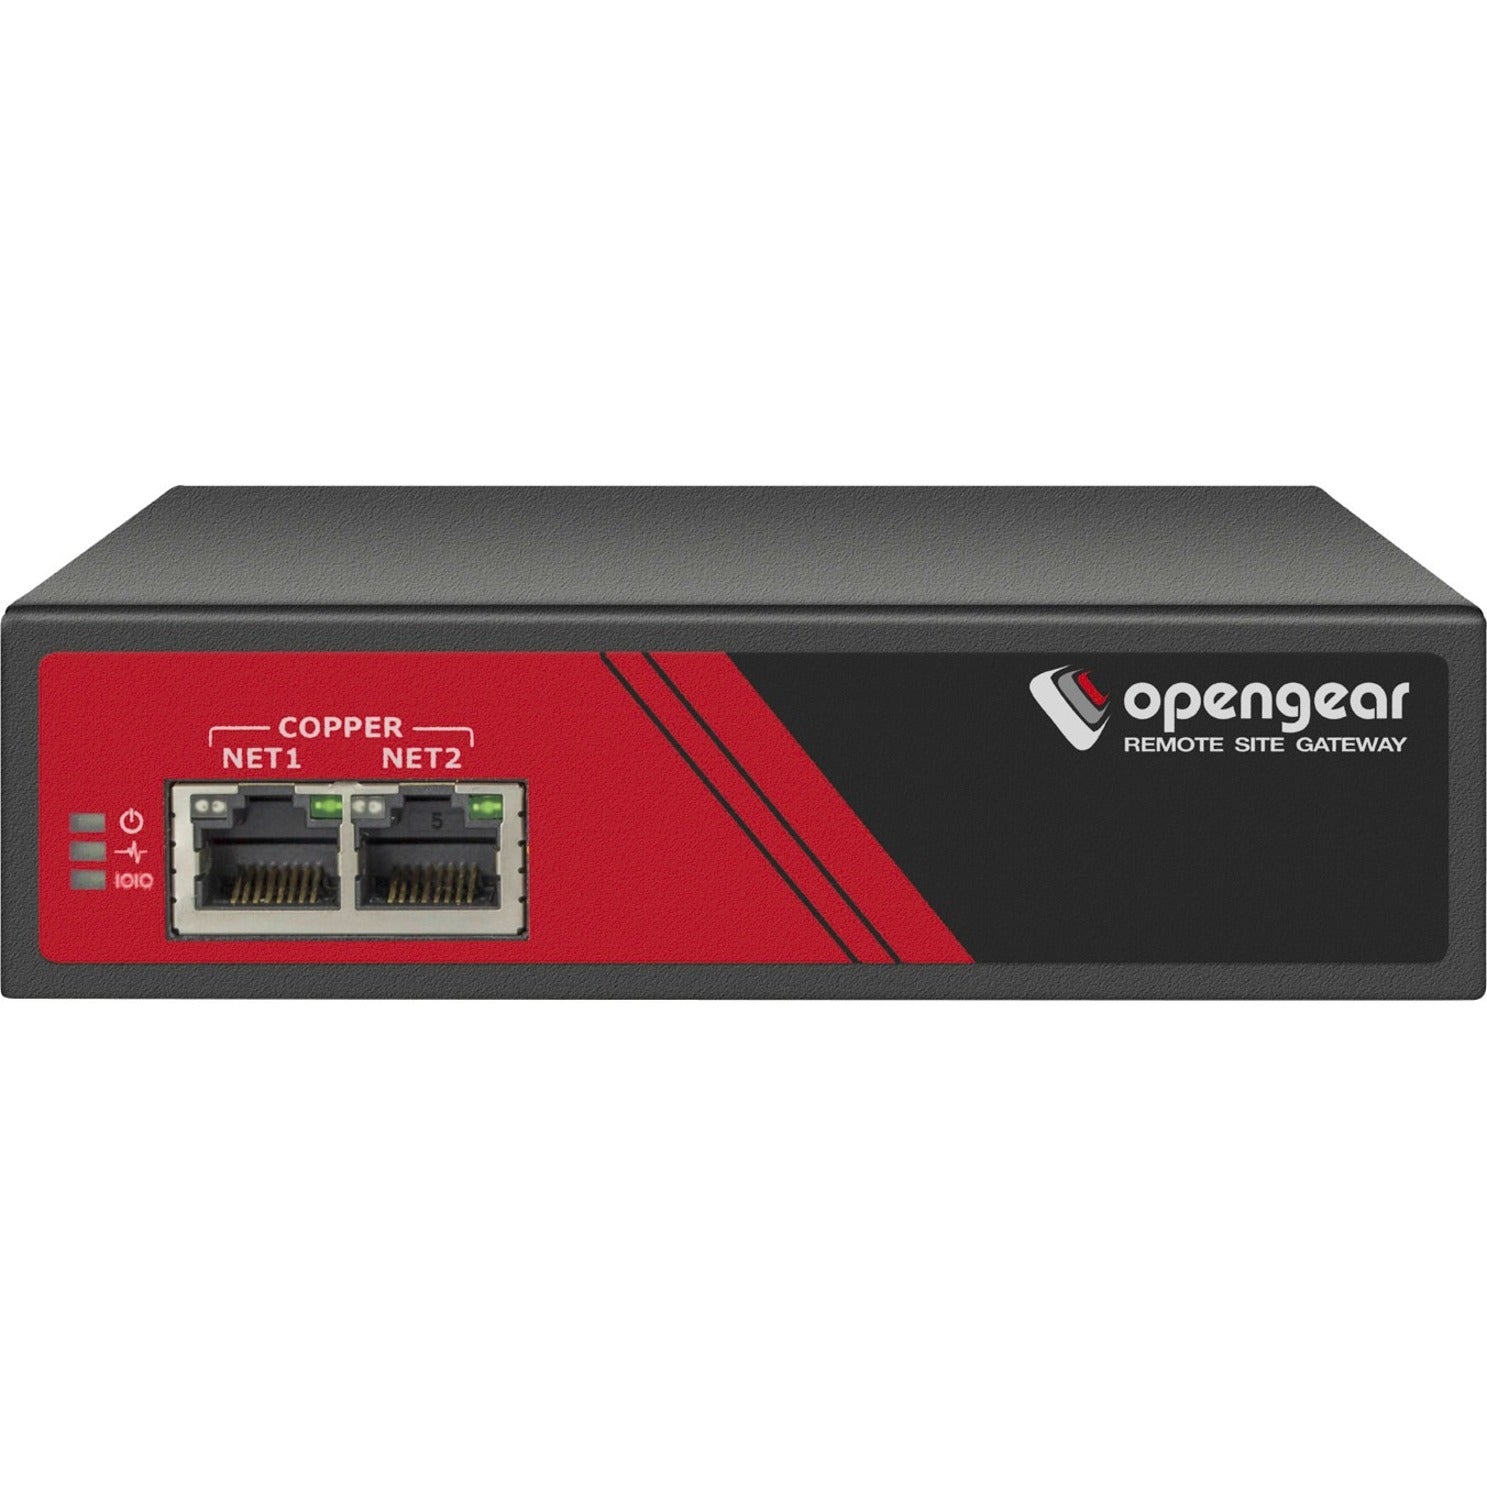 Opengear ACM7004-2 Remote Site Gateway, 4 Serial Cisco Straight Pinout, 2 GbE Ethernet, 4 USB Console Ports